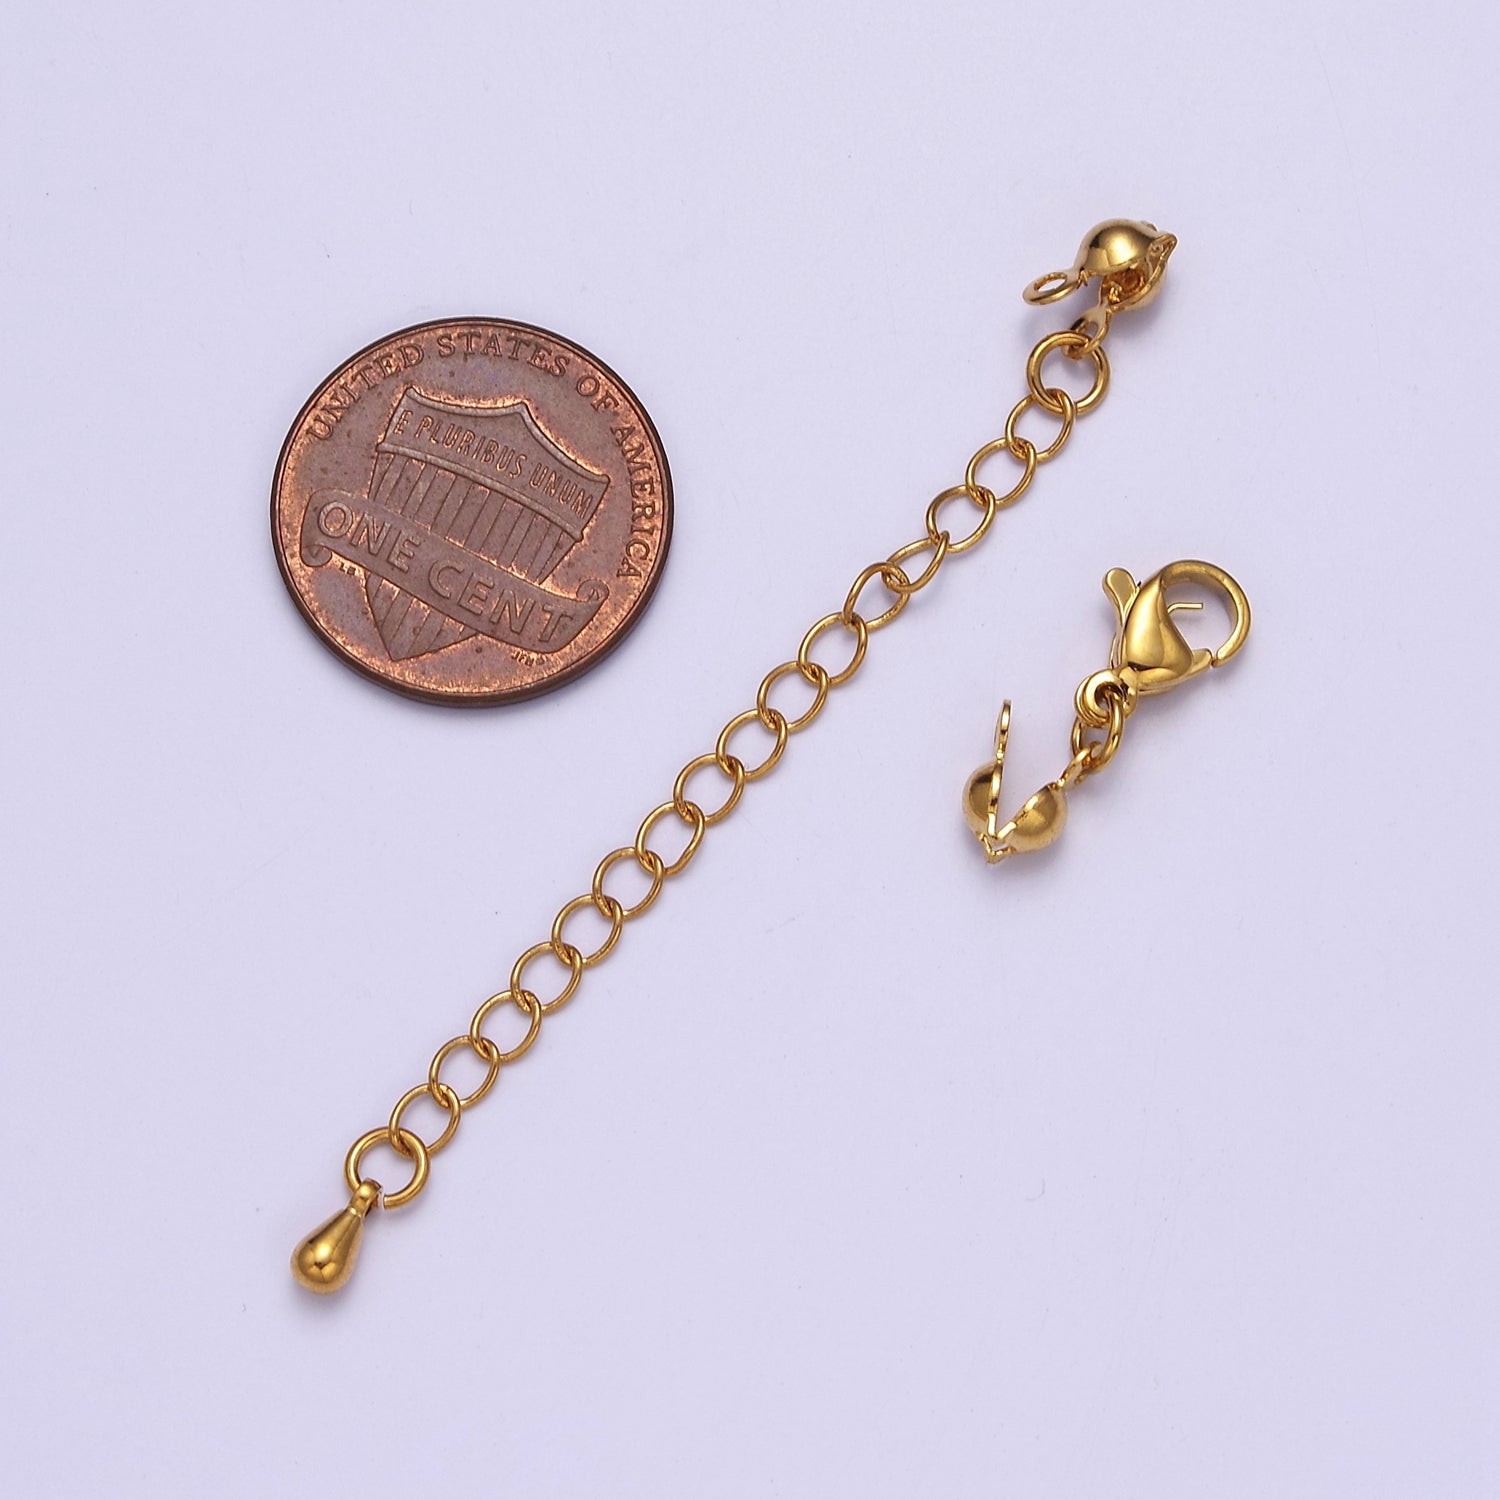 24K Gold Filled Jewelry Extender with Clamshell Bead Tip Extender Necklaces, Bracelets and Anklet L-721 - DLUXCA